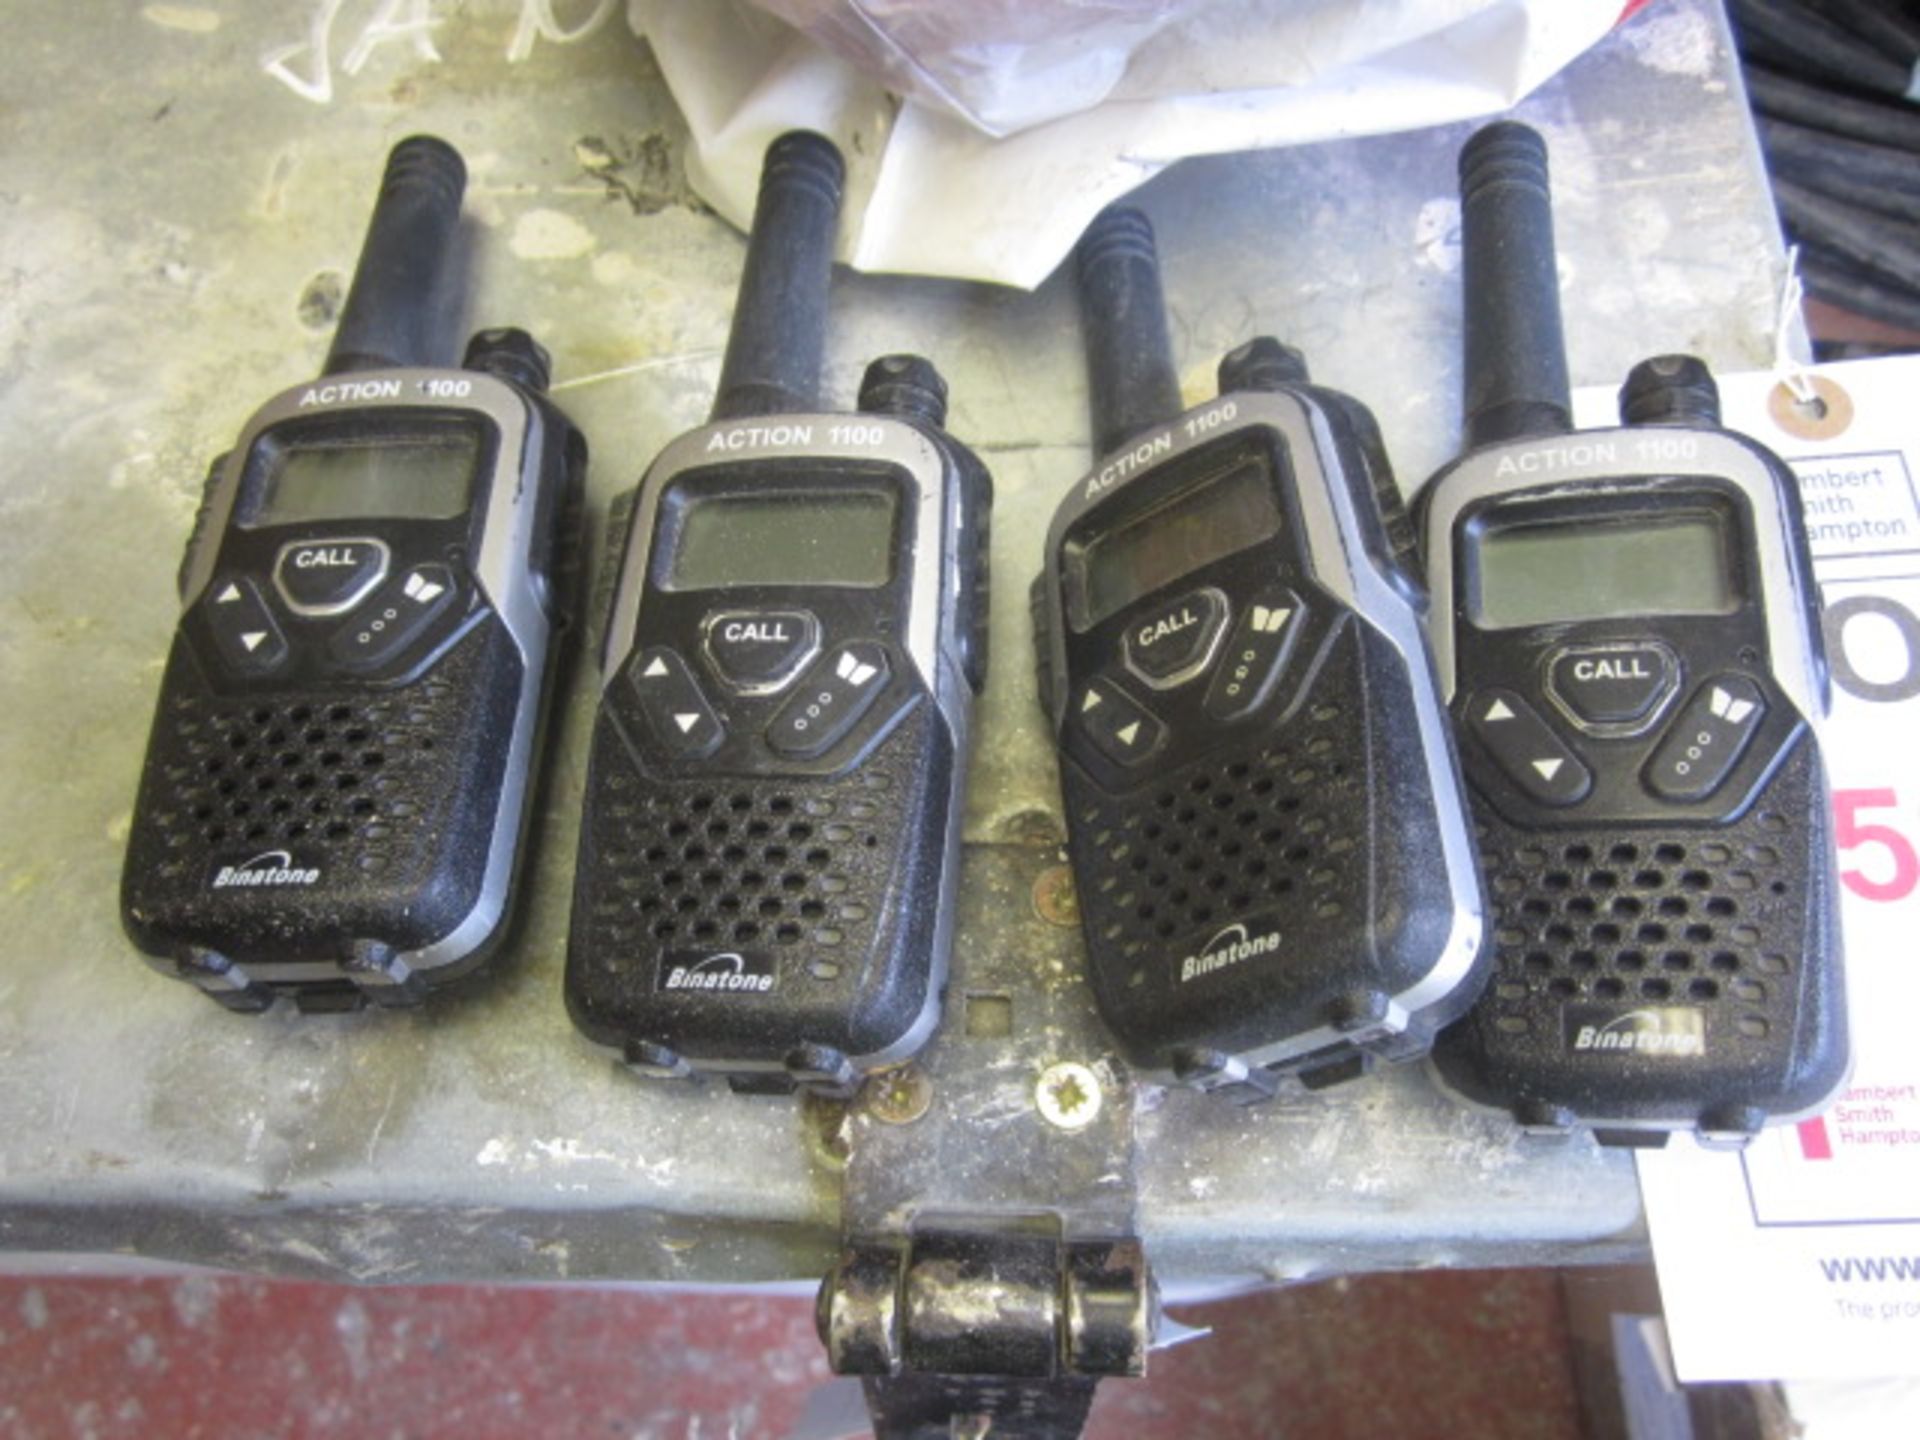 4 x Binatone Action 100 walkie talkies with 2 x double base stations. Located: AC Interiors, Unit